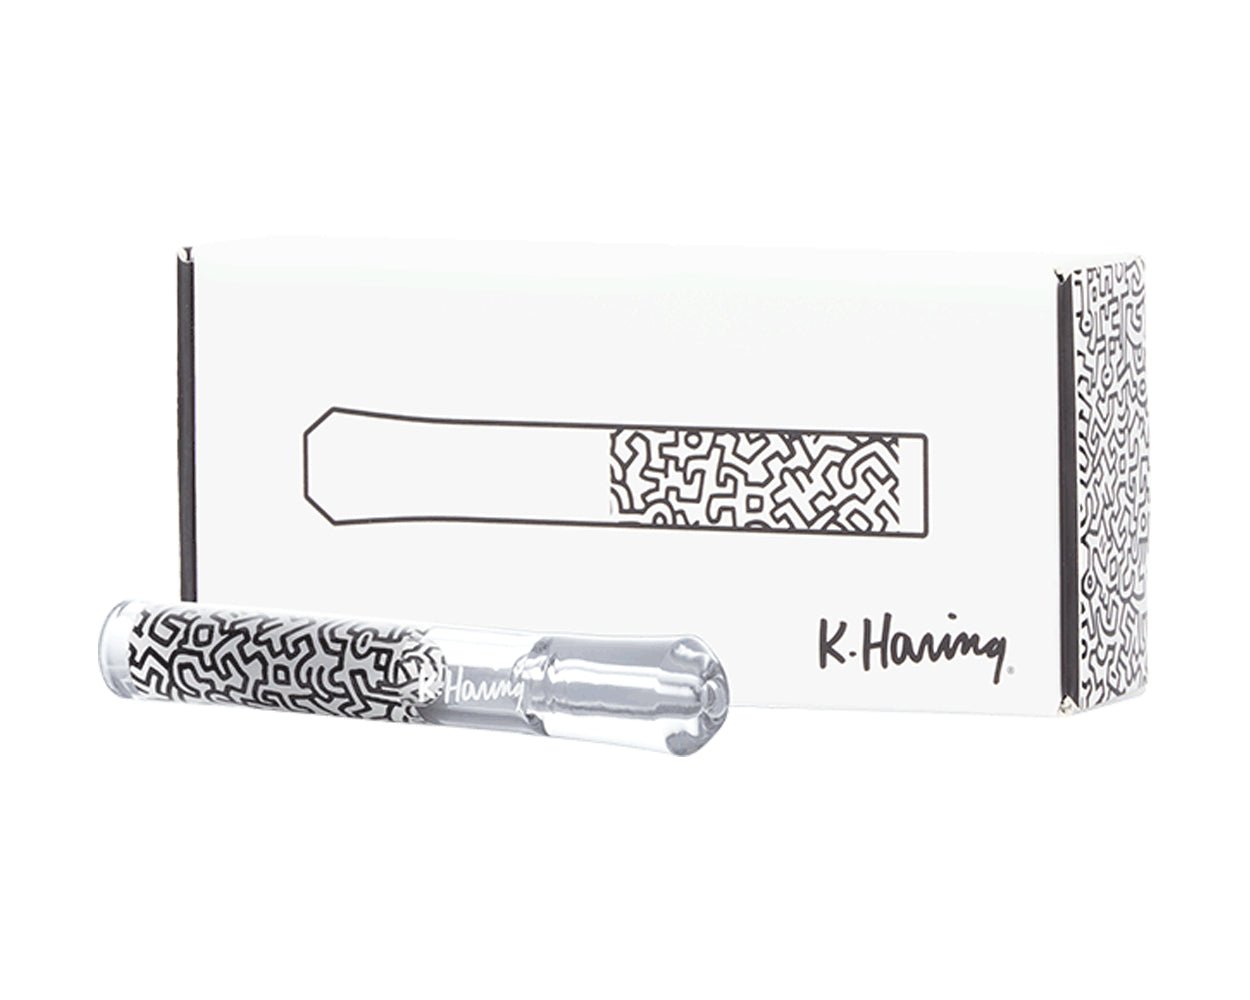 Keith Haring | Glass Taster Chillum Hand Pipe | 3in Long - Glass - Black & White - 2